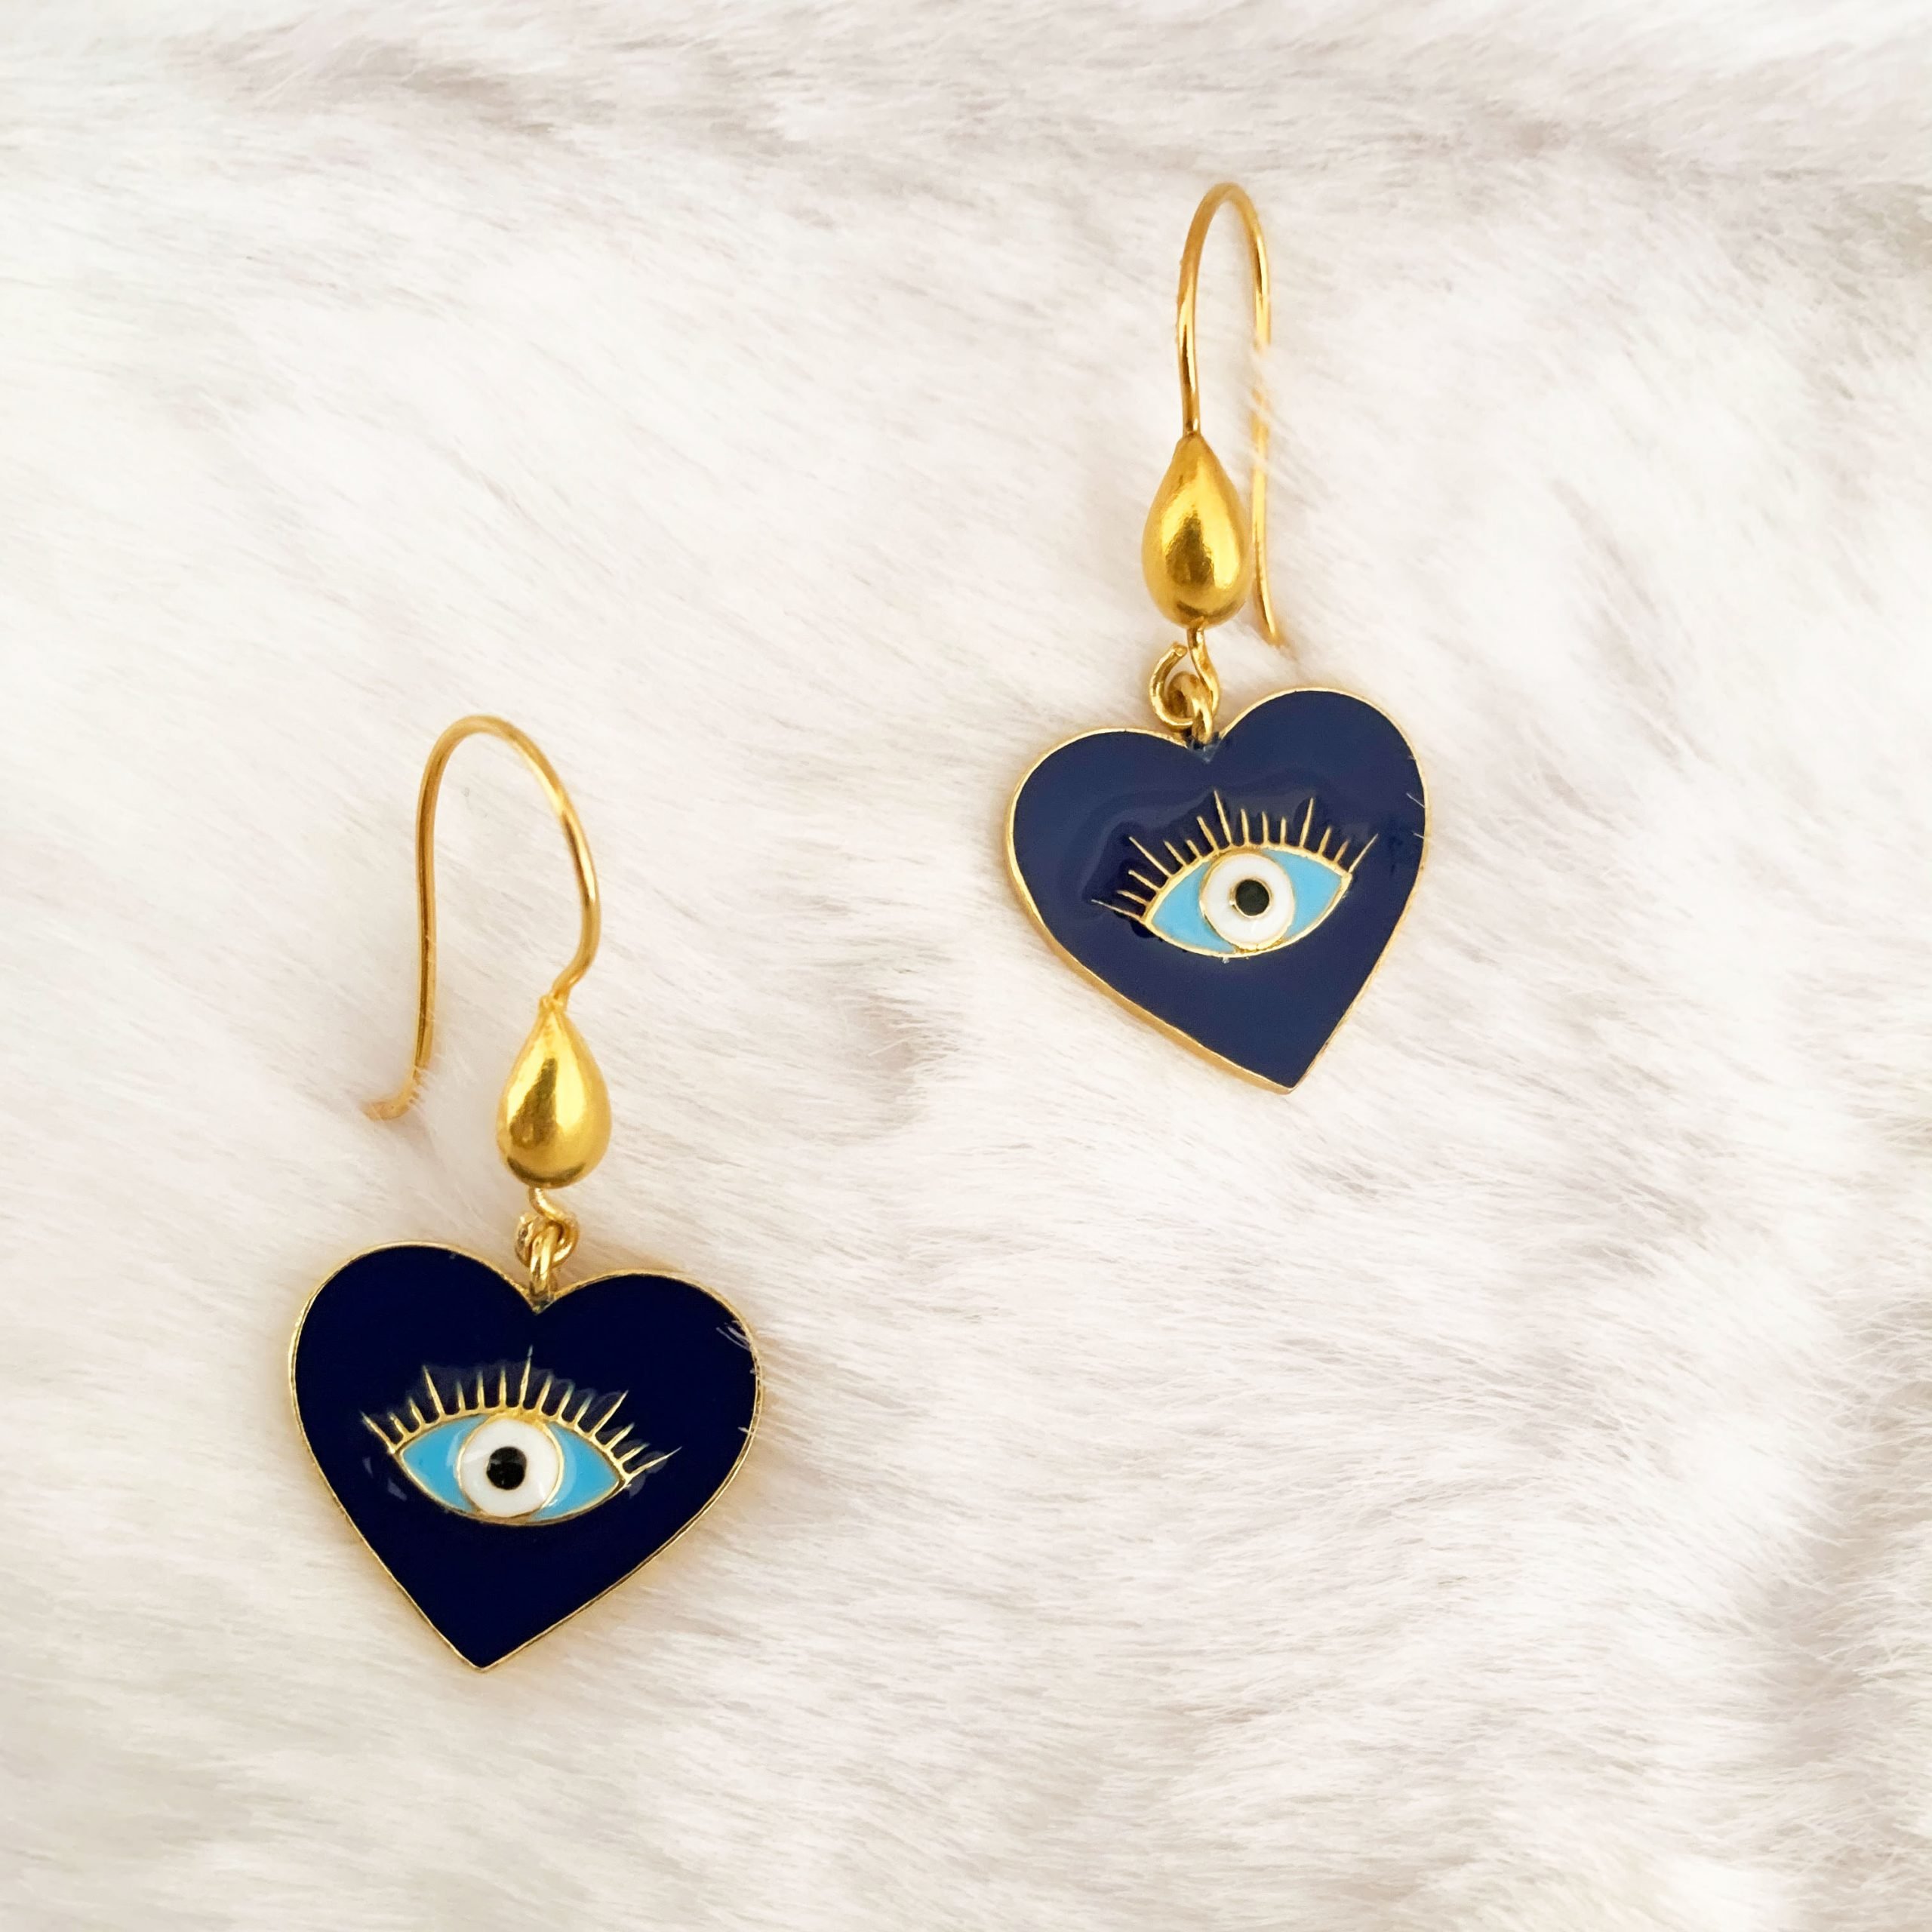 Buy Set of 3 Pairs Evil Eye Earrings / Evil Eye Theme Assorted Earrings Set  / Mix and Match Earrings / Layered Earring Set Online in India - Etsy